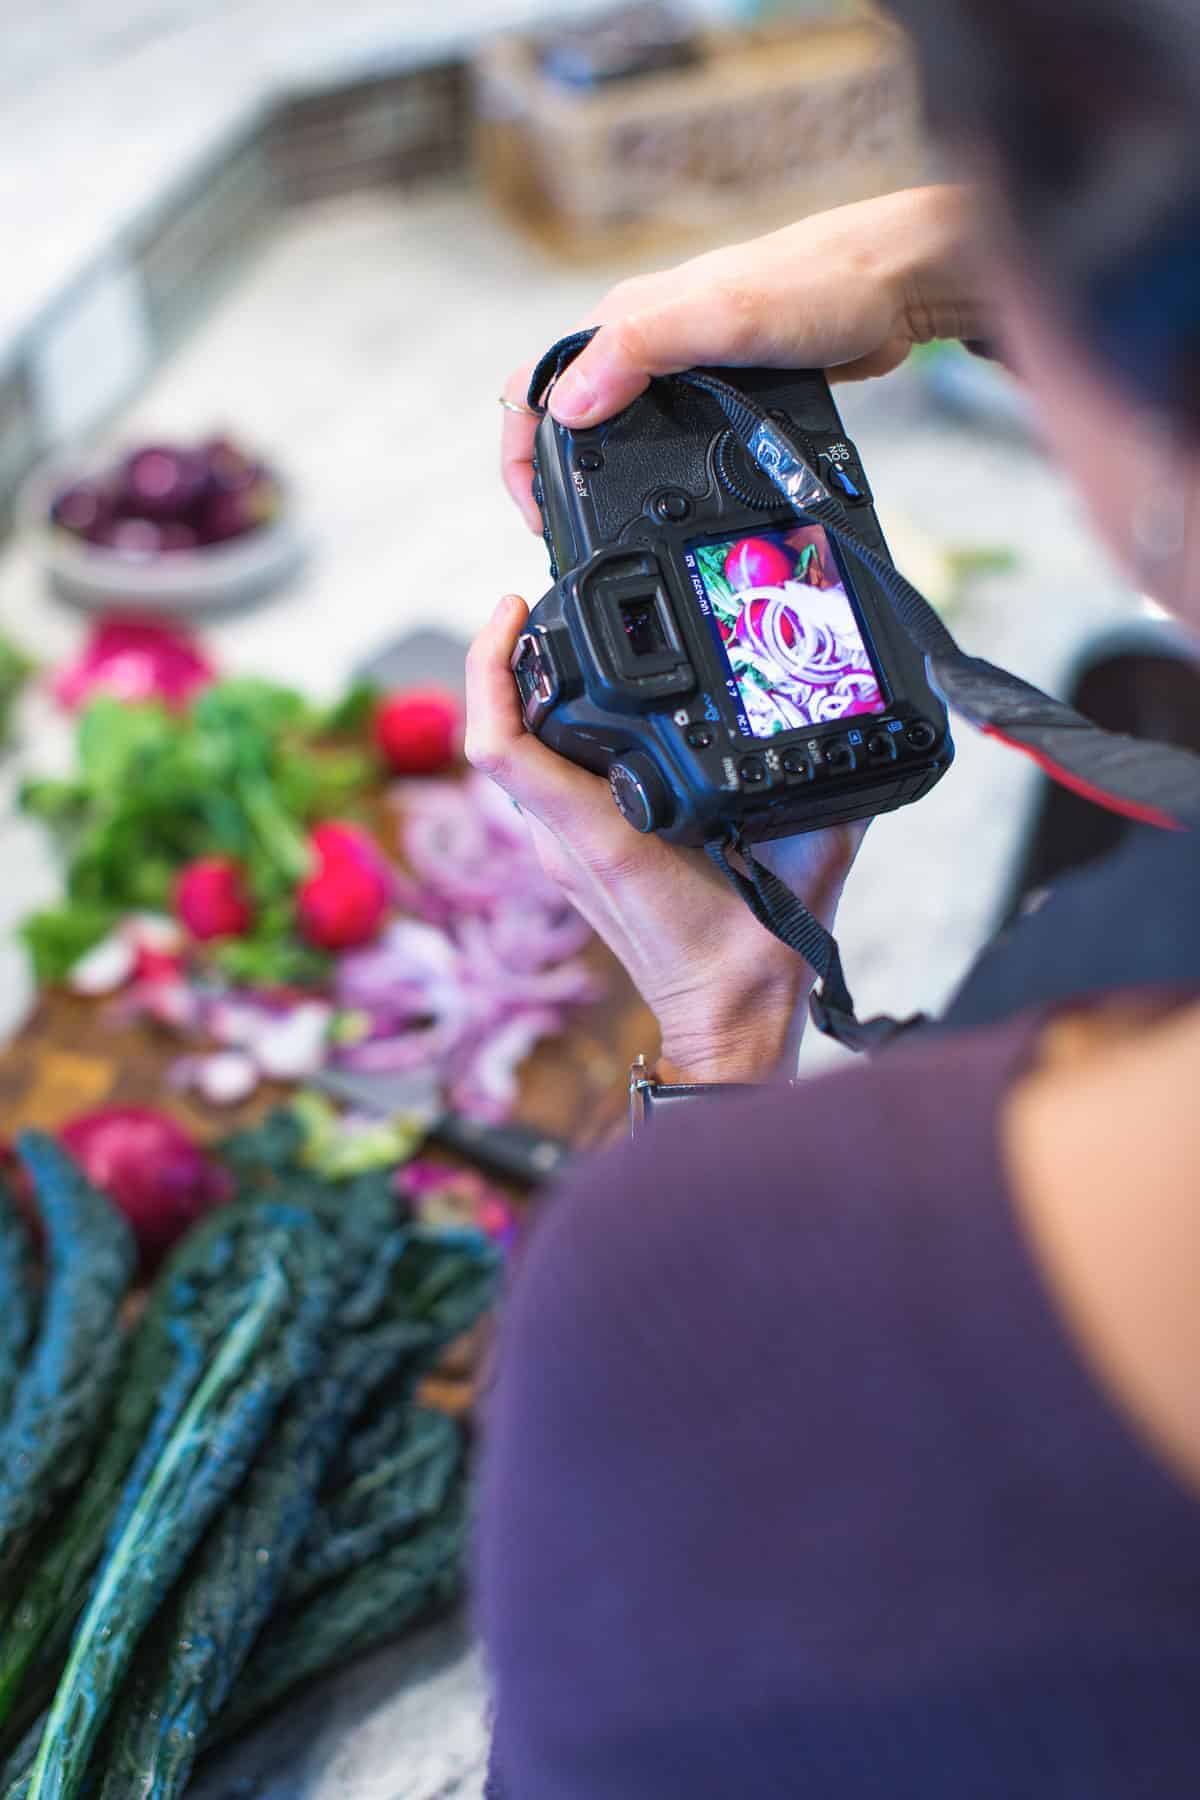 Food photography resources